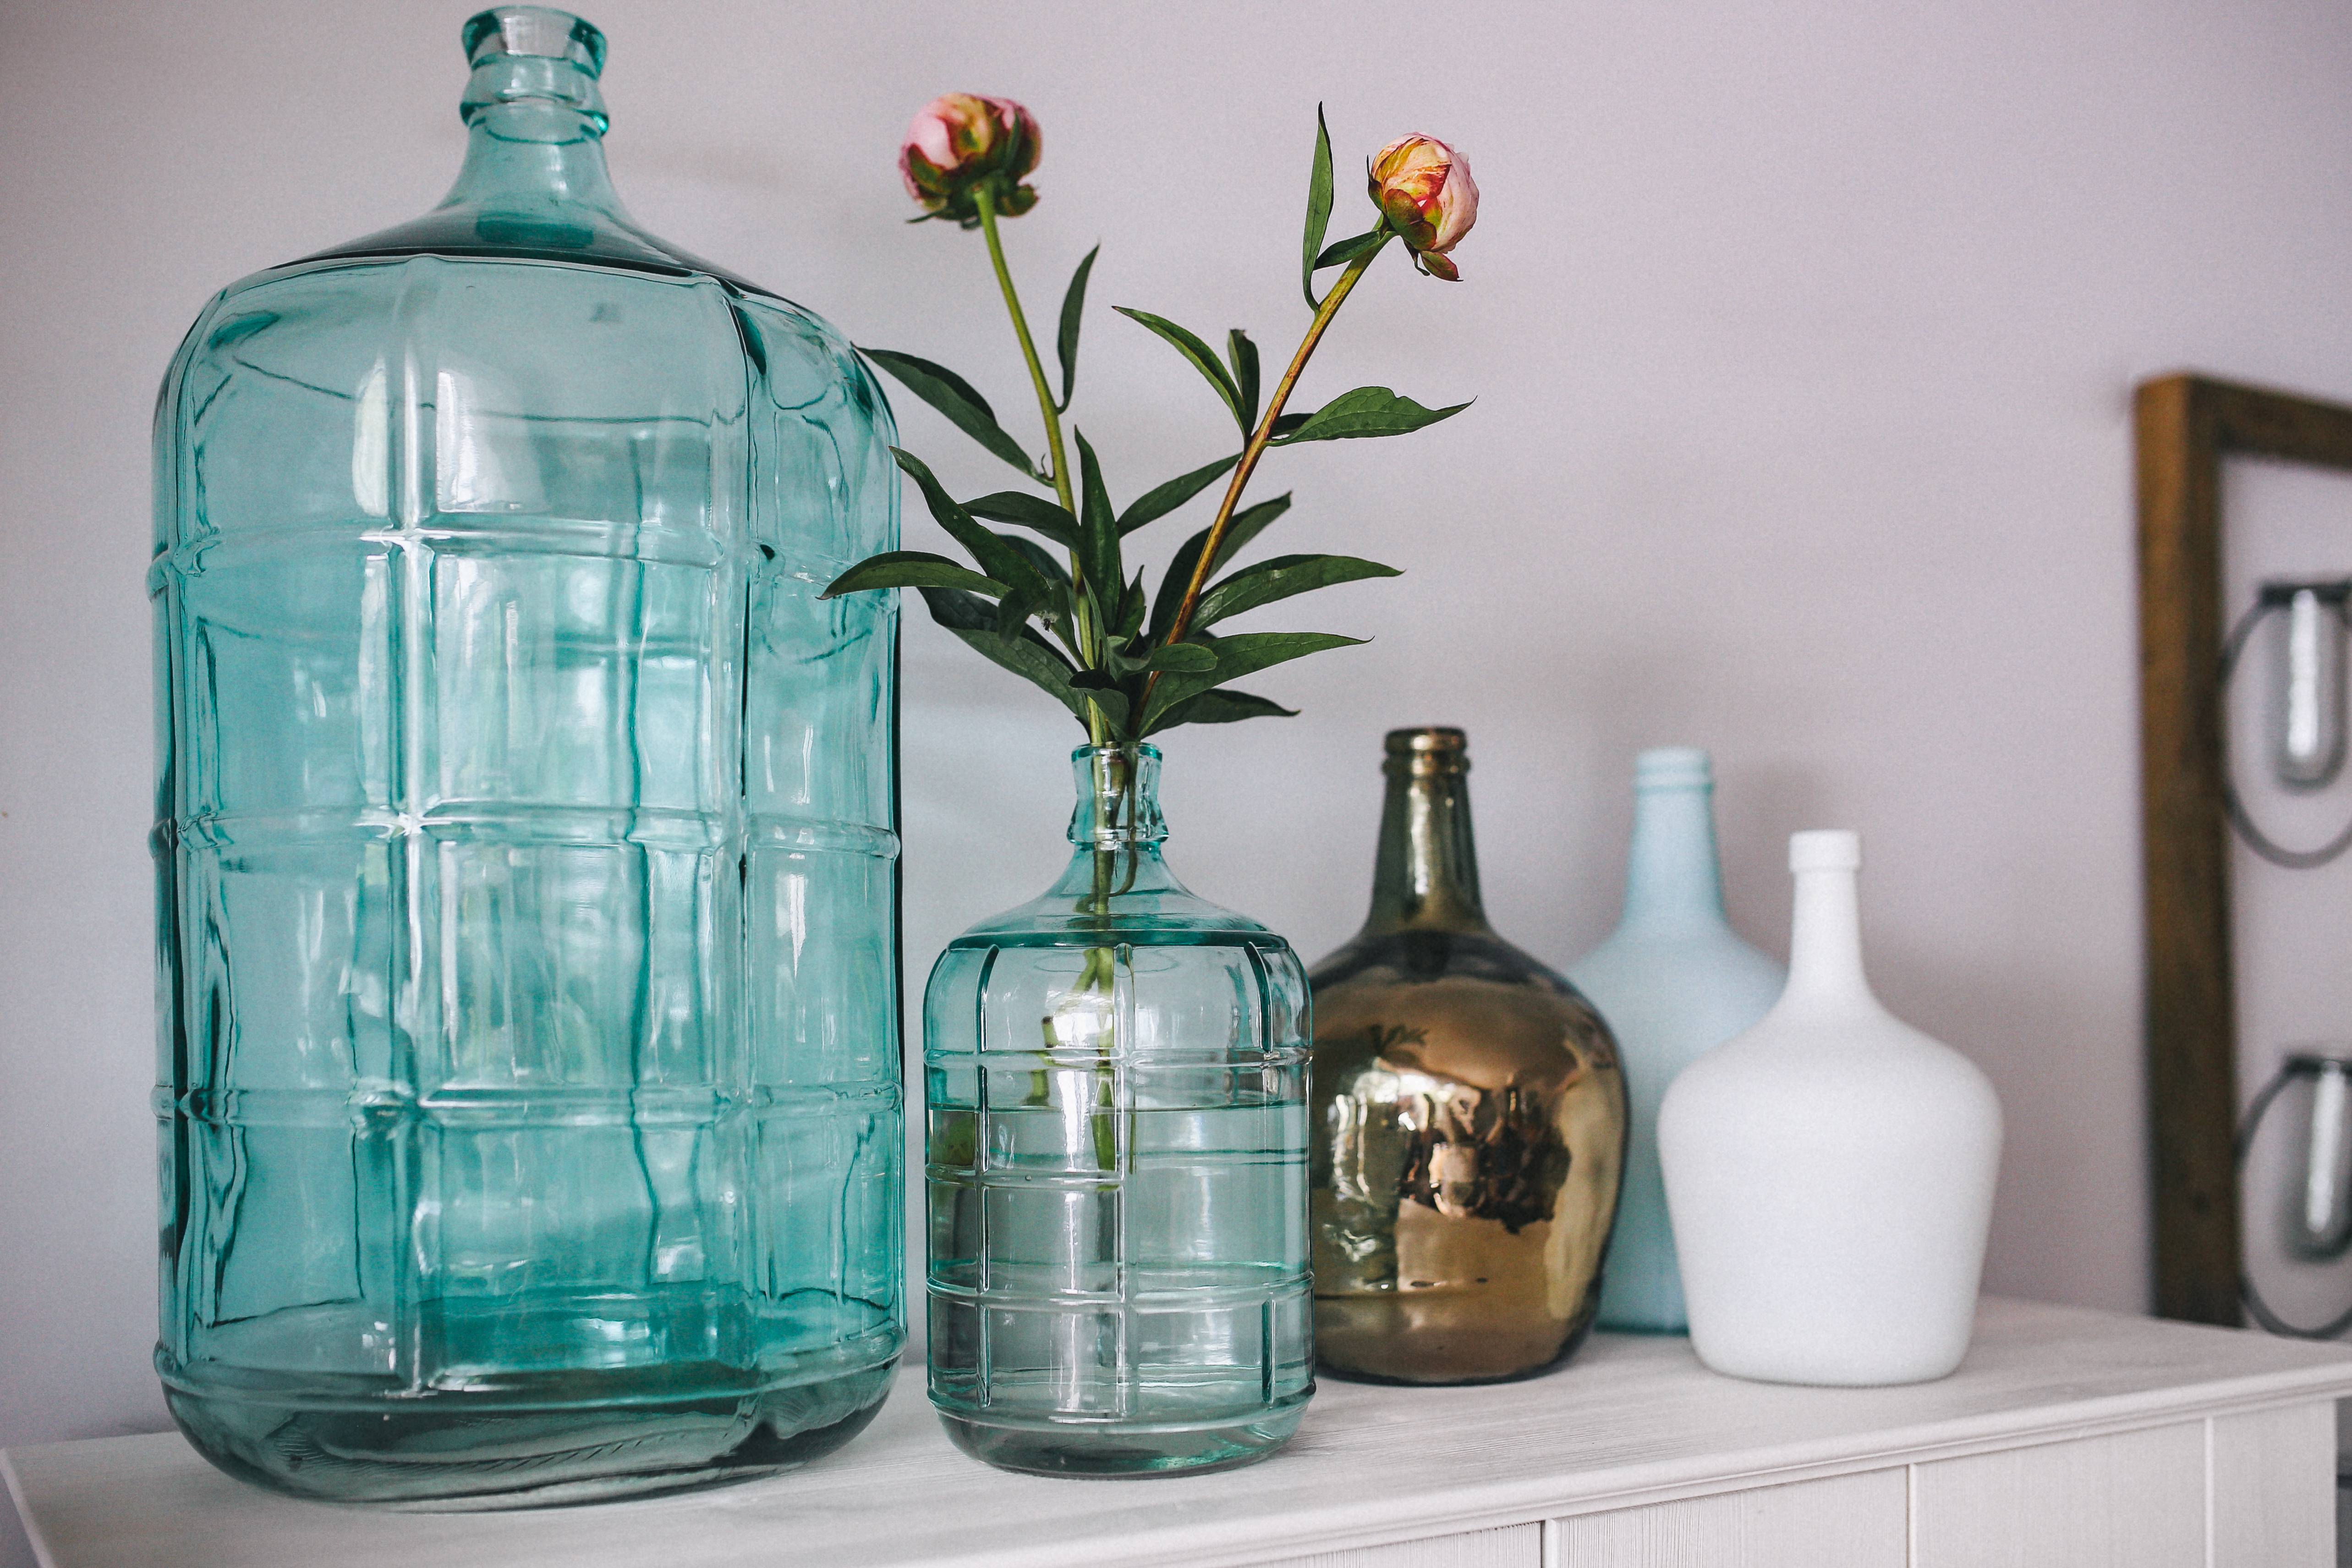 vases in the shape of water jugs